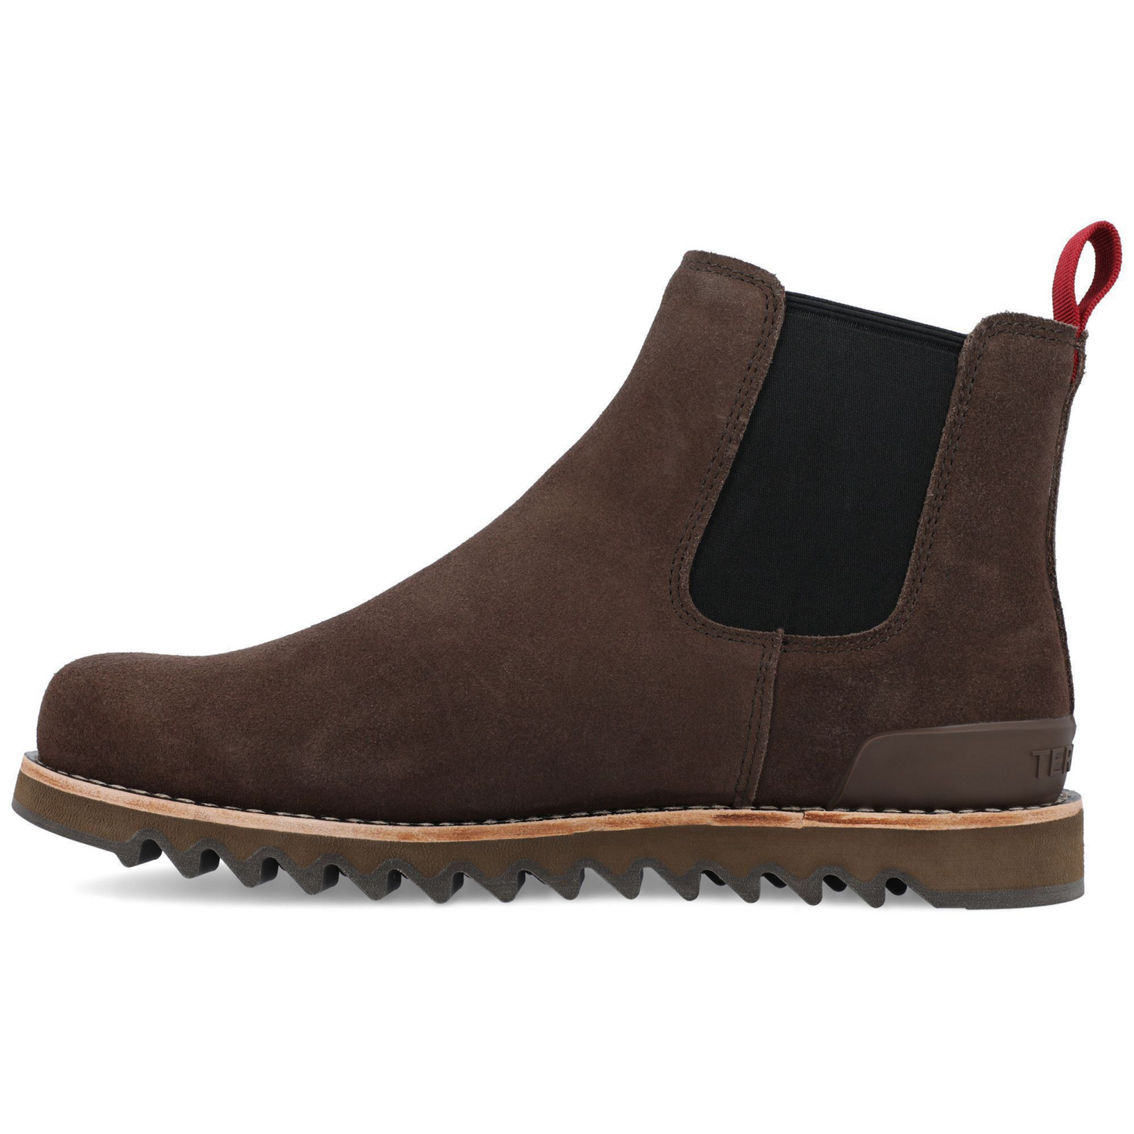 Territory Yellowstone Water Resistant Chelsea Boot - Image 4 of 5